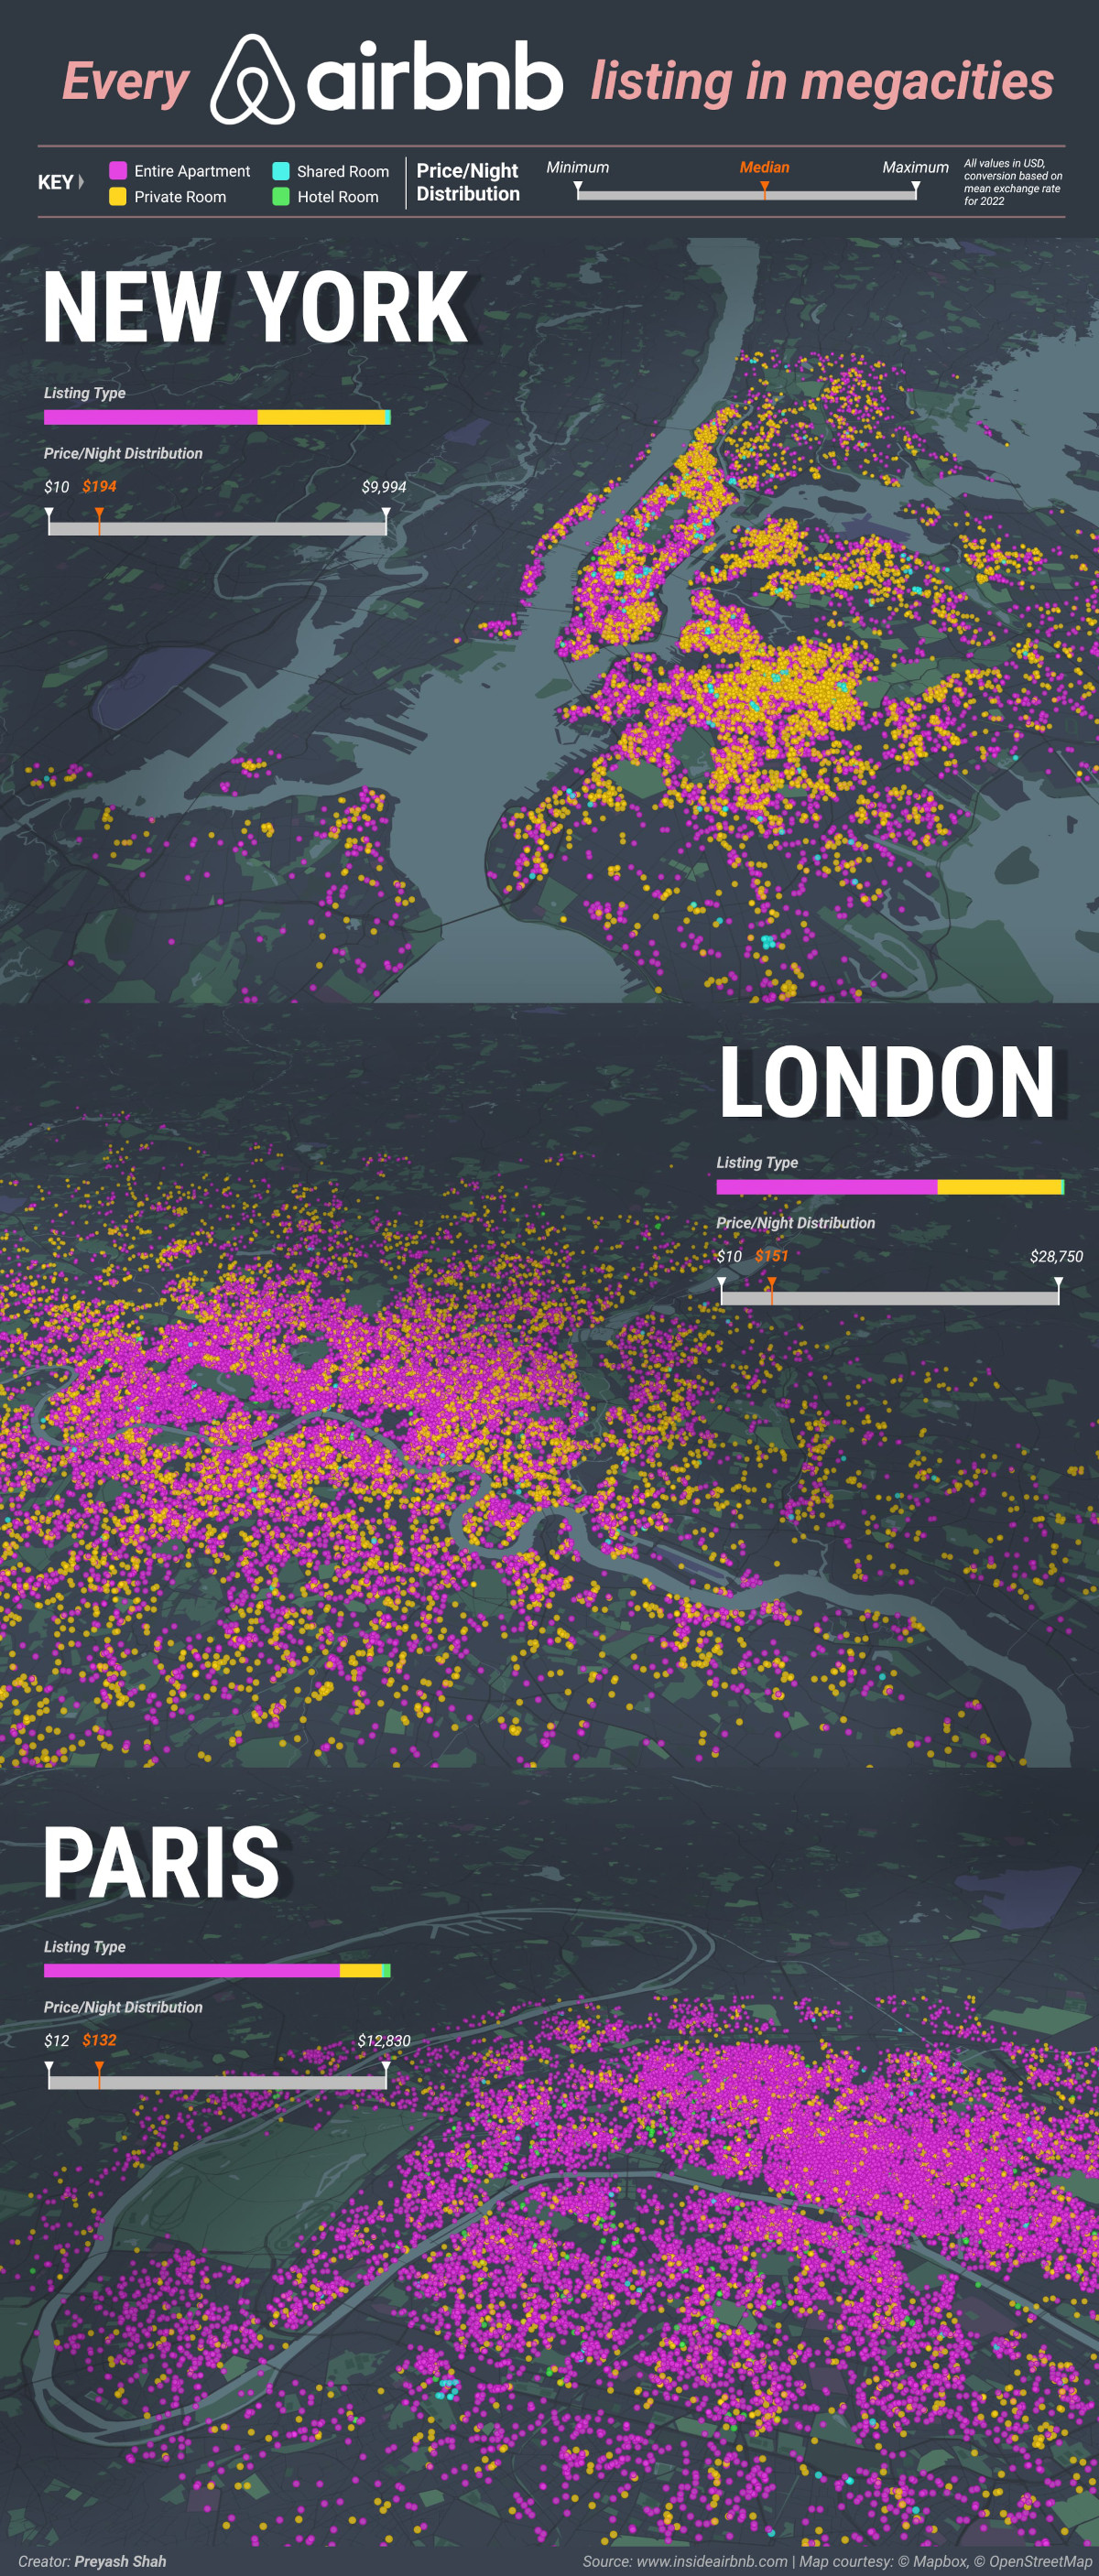 map of every airbnb listing in paris, london and new york